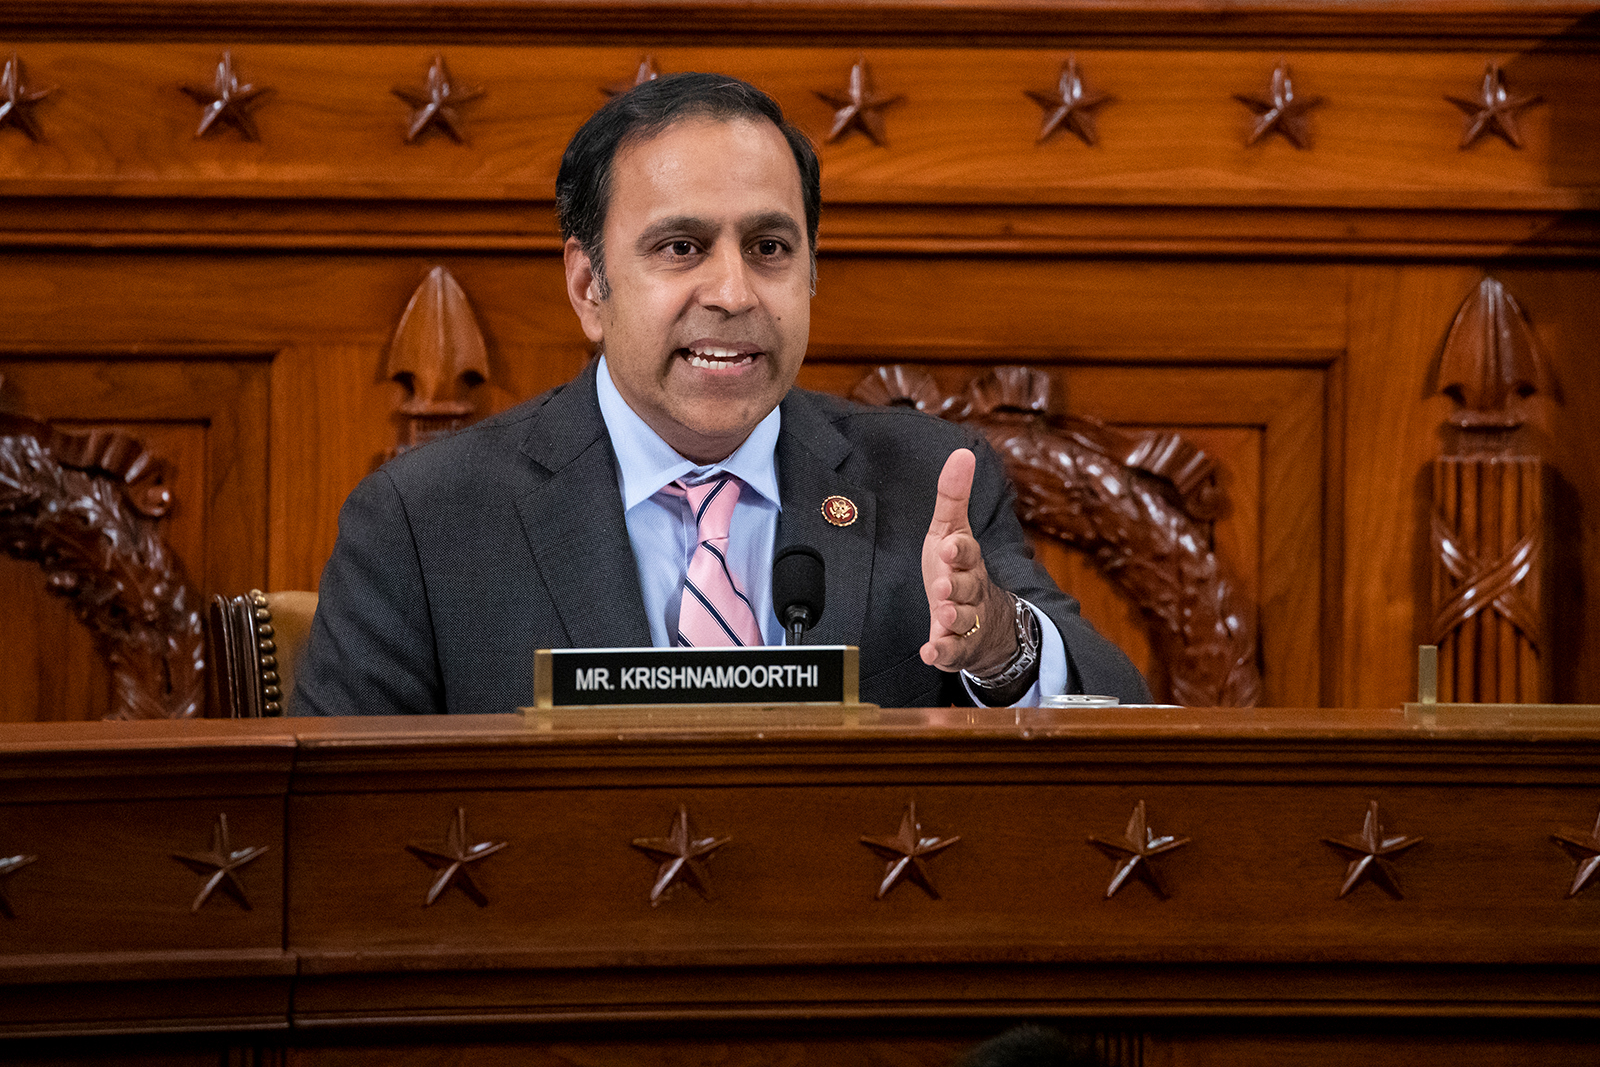 US Rep. Raja Krishnamoorthi (D-IL) asks questions during a hearing before the House Intelligence Committee on Capitol Hill in Washington, DC, on November 20, 2019 